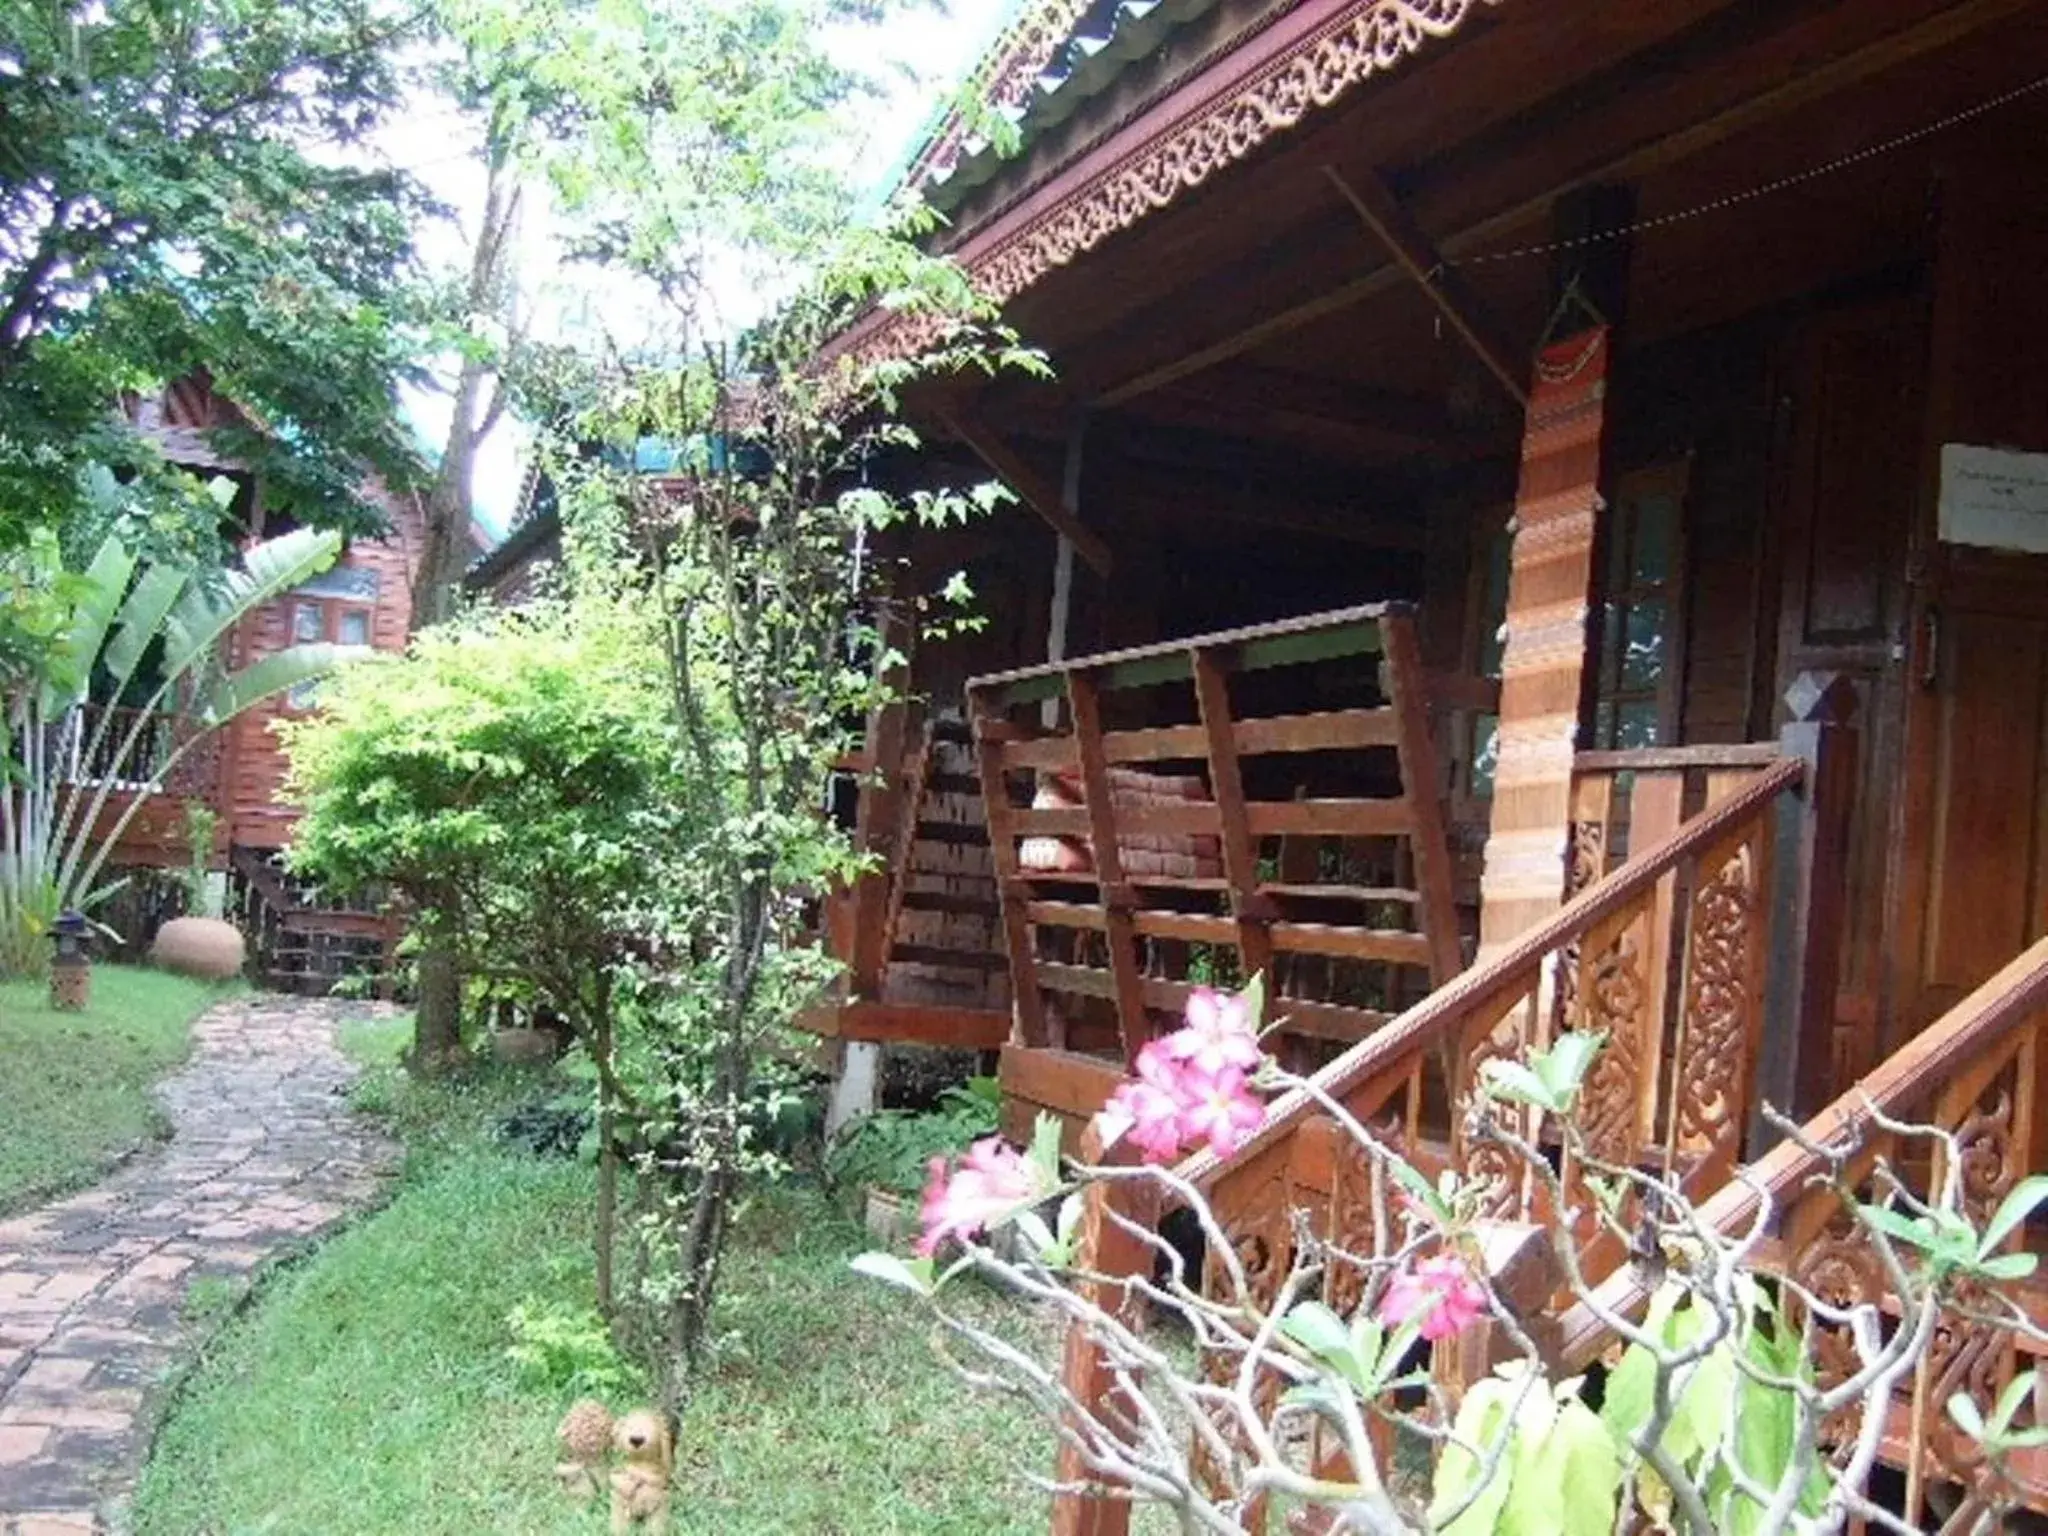 Property Building in TR Guesthouse